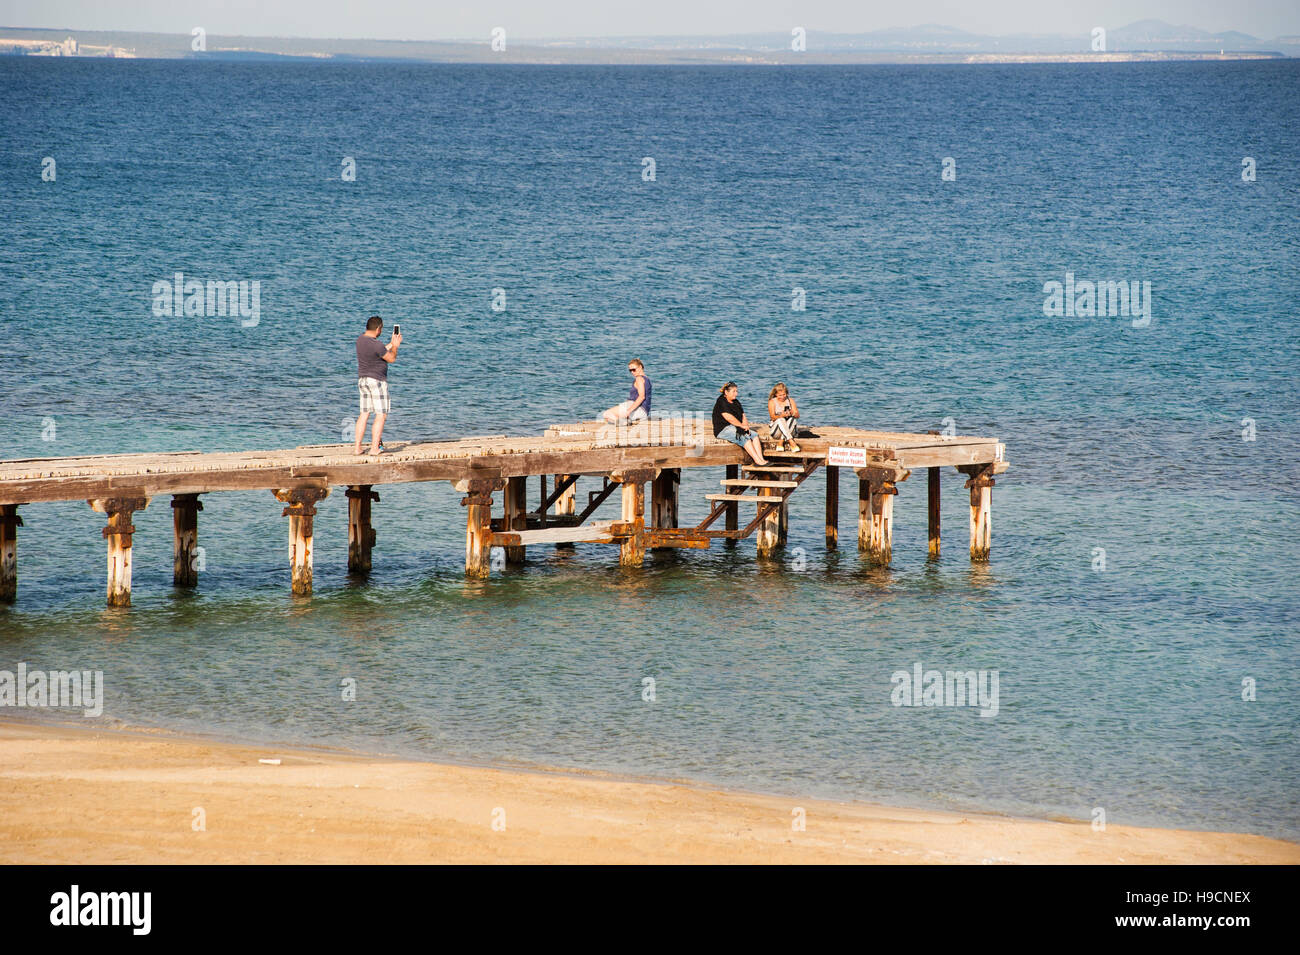 Tourists on a wooden pier in Salamis, Northern Cyprus overlooking the Famagusta bay. Stock Photo